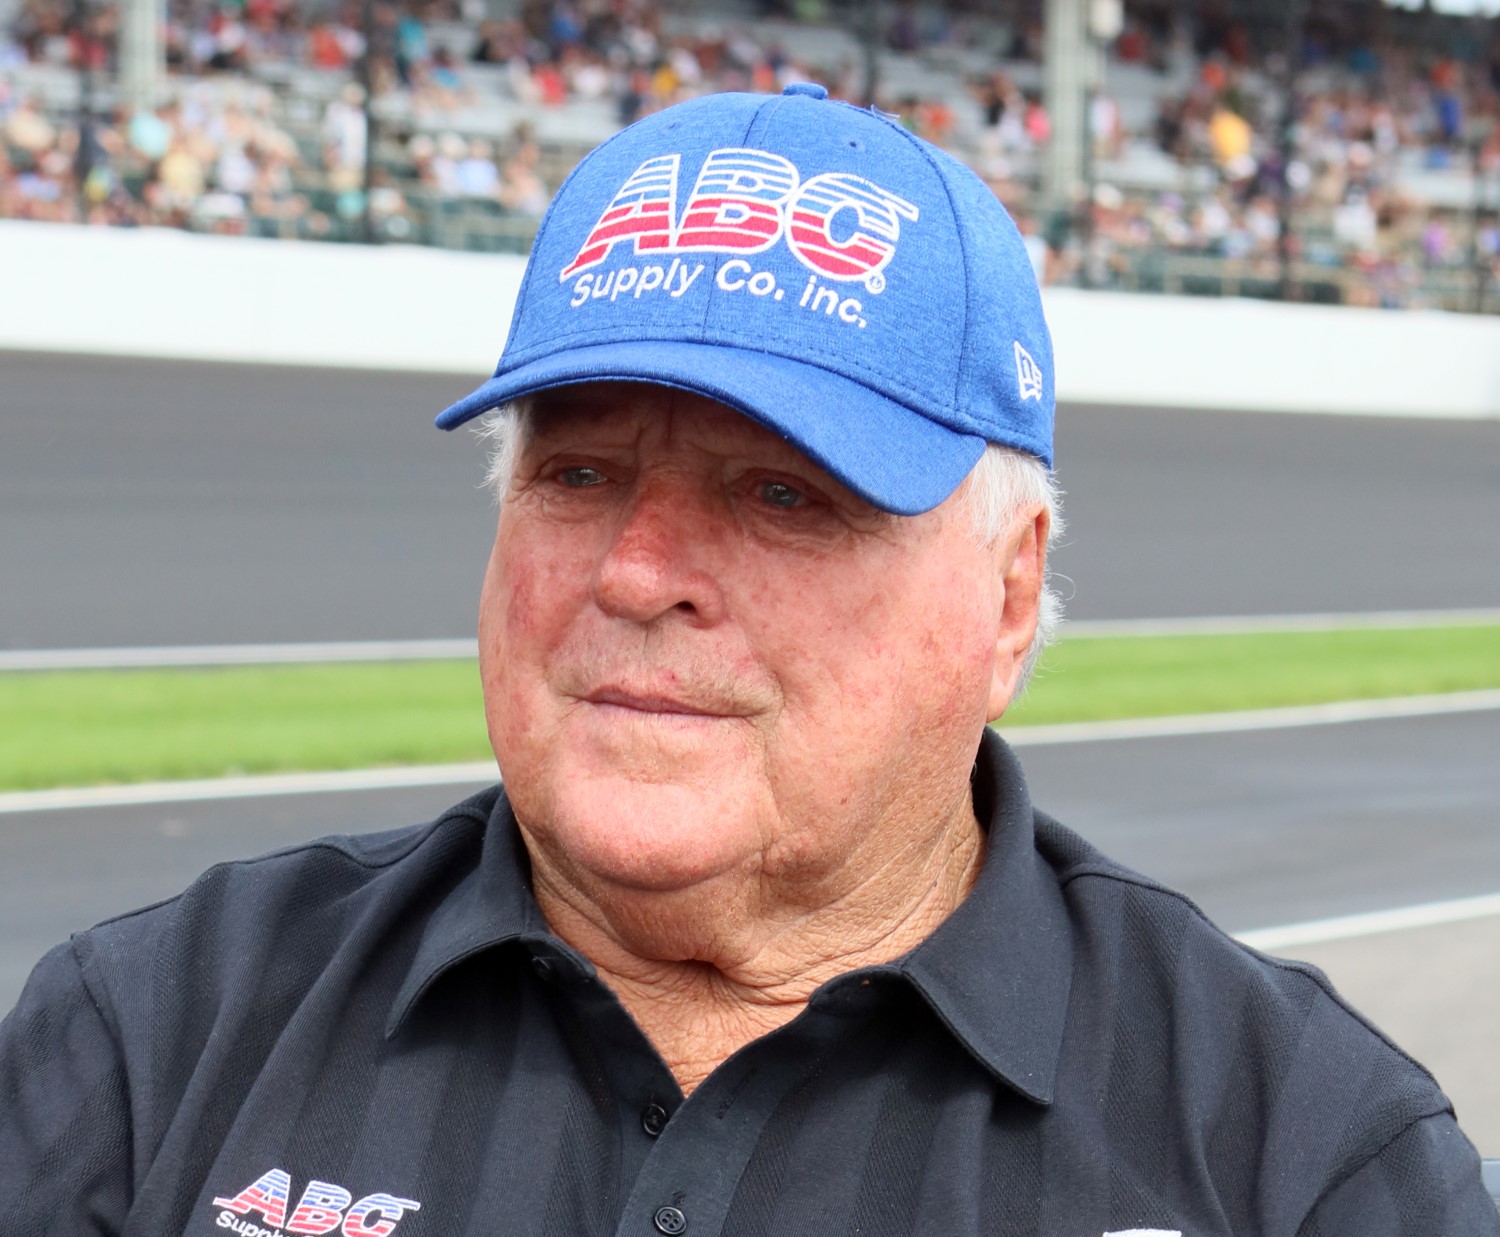 ABC Supply dumps Foyt sponsorship. They must have seen those NBCSN TV ratings